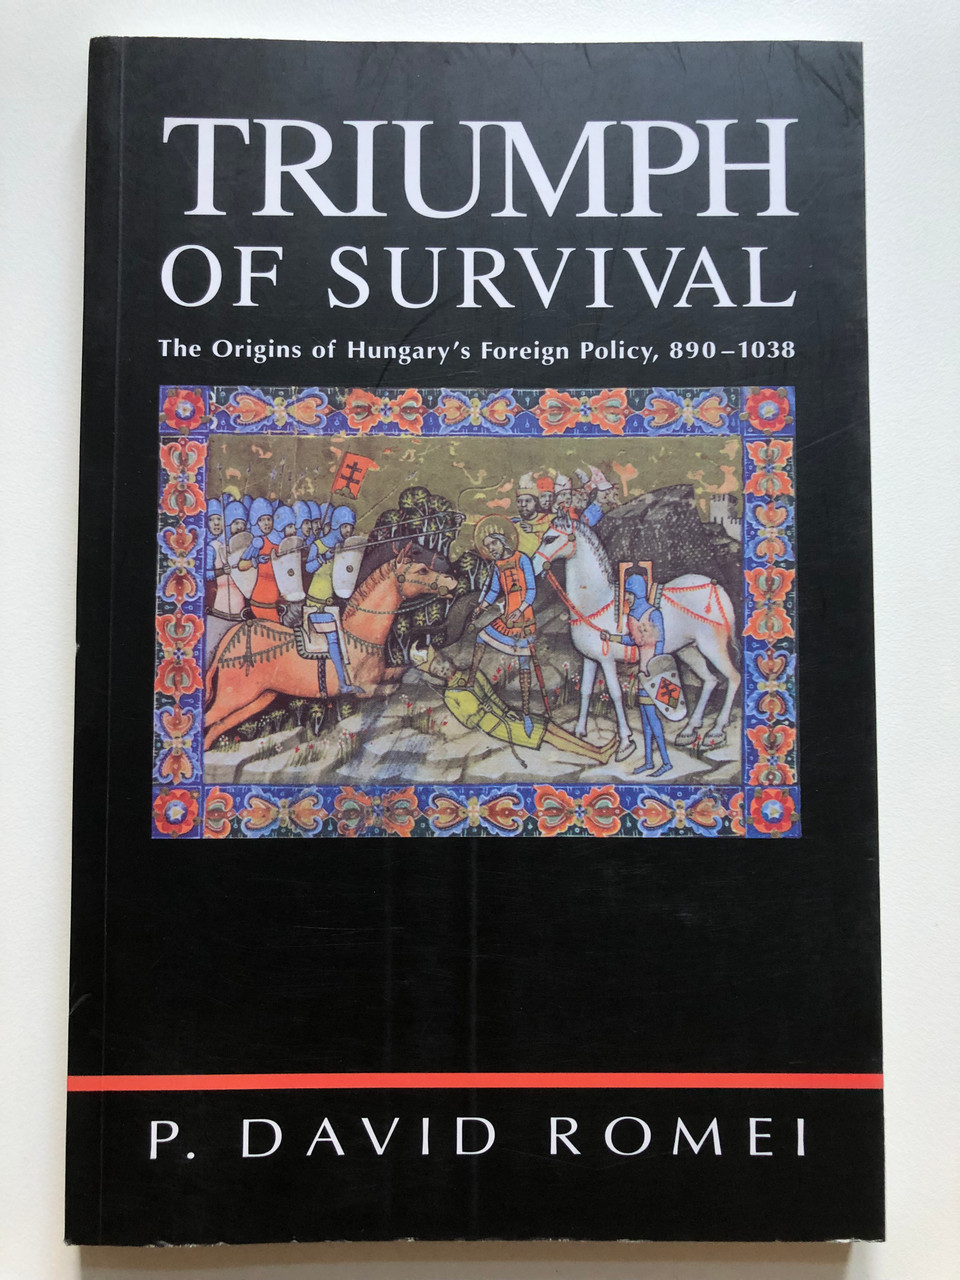 Triumph of Survival: The Origins of Hungary's Foreign Policy, 890-1038 /  Published in 2003 by Corvina Books / foreign policy of King St. Stephen as  the instrument that forged the foundation of